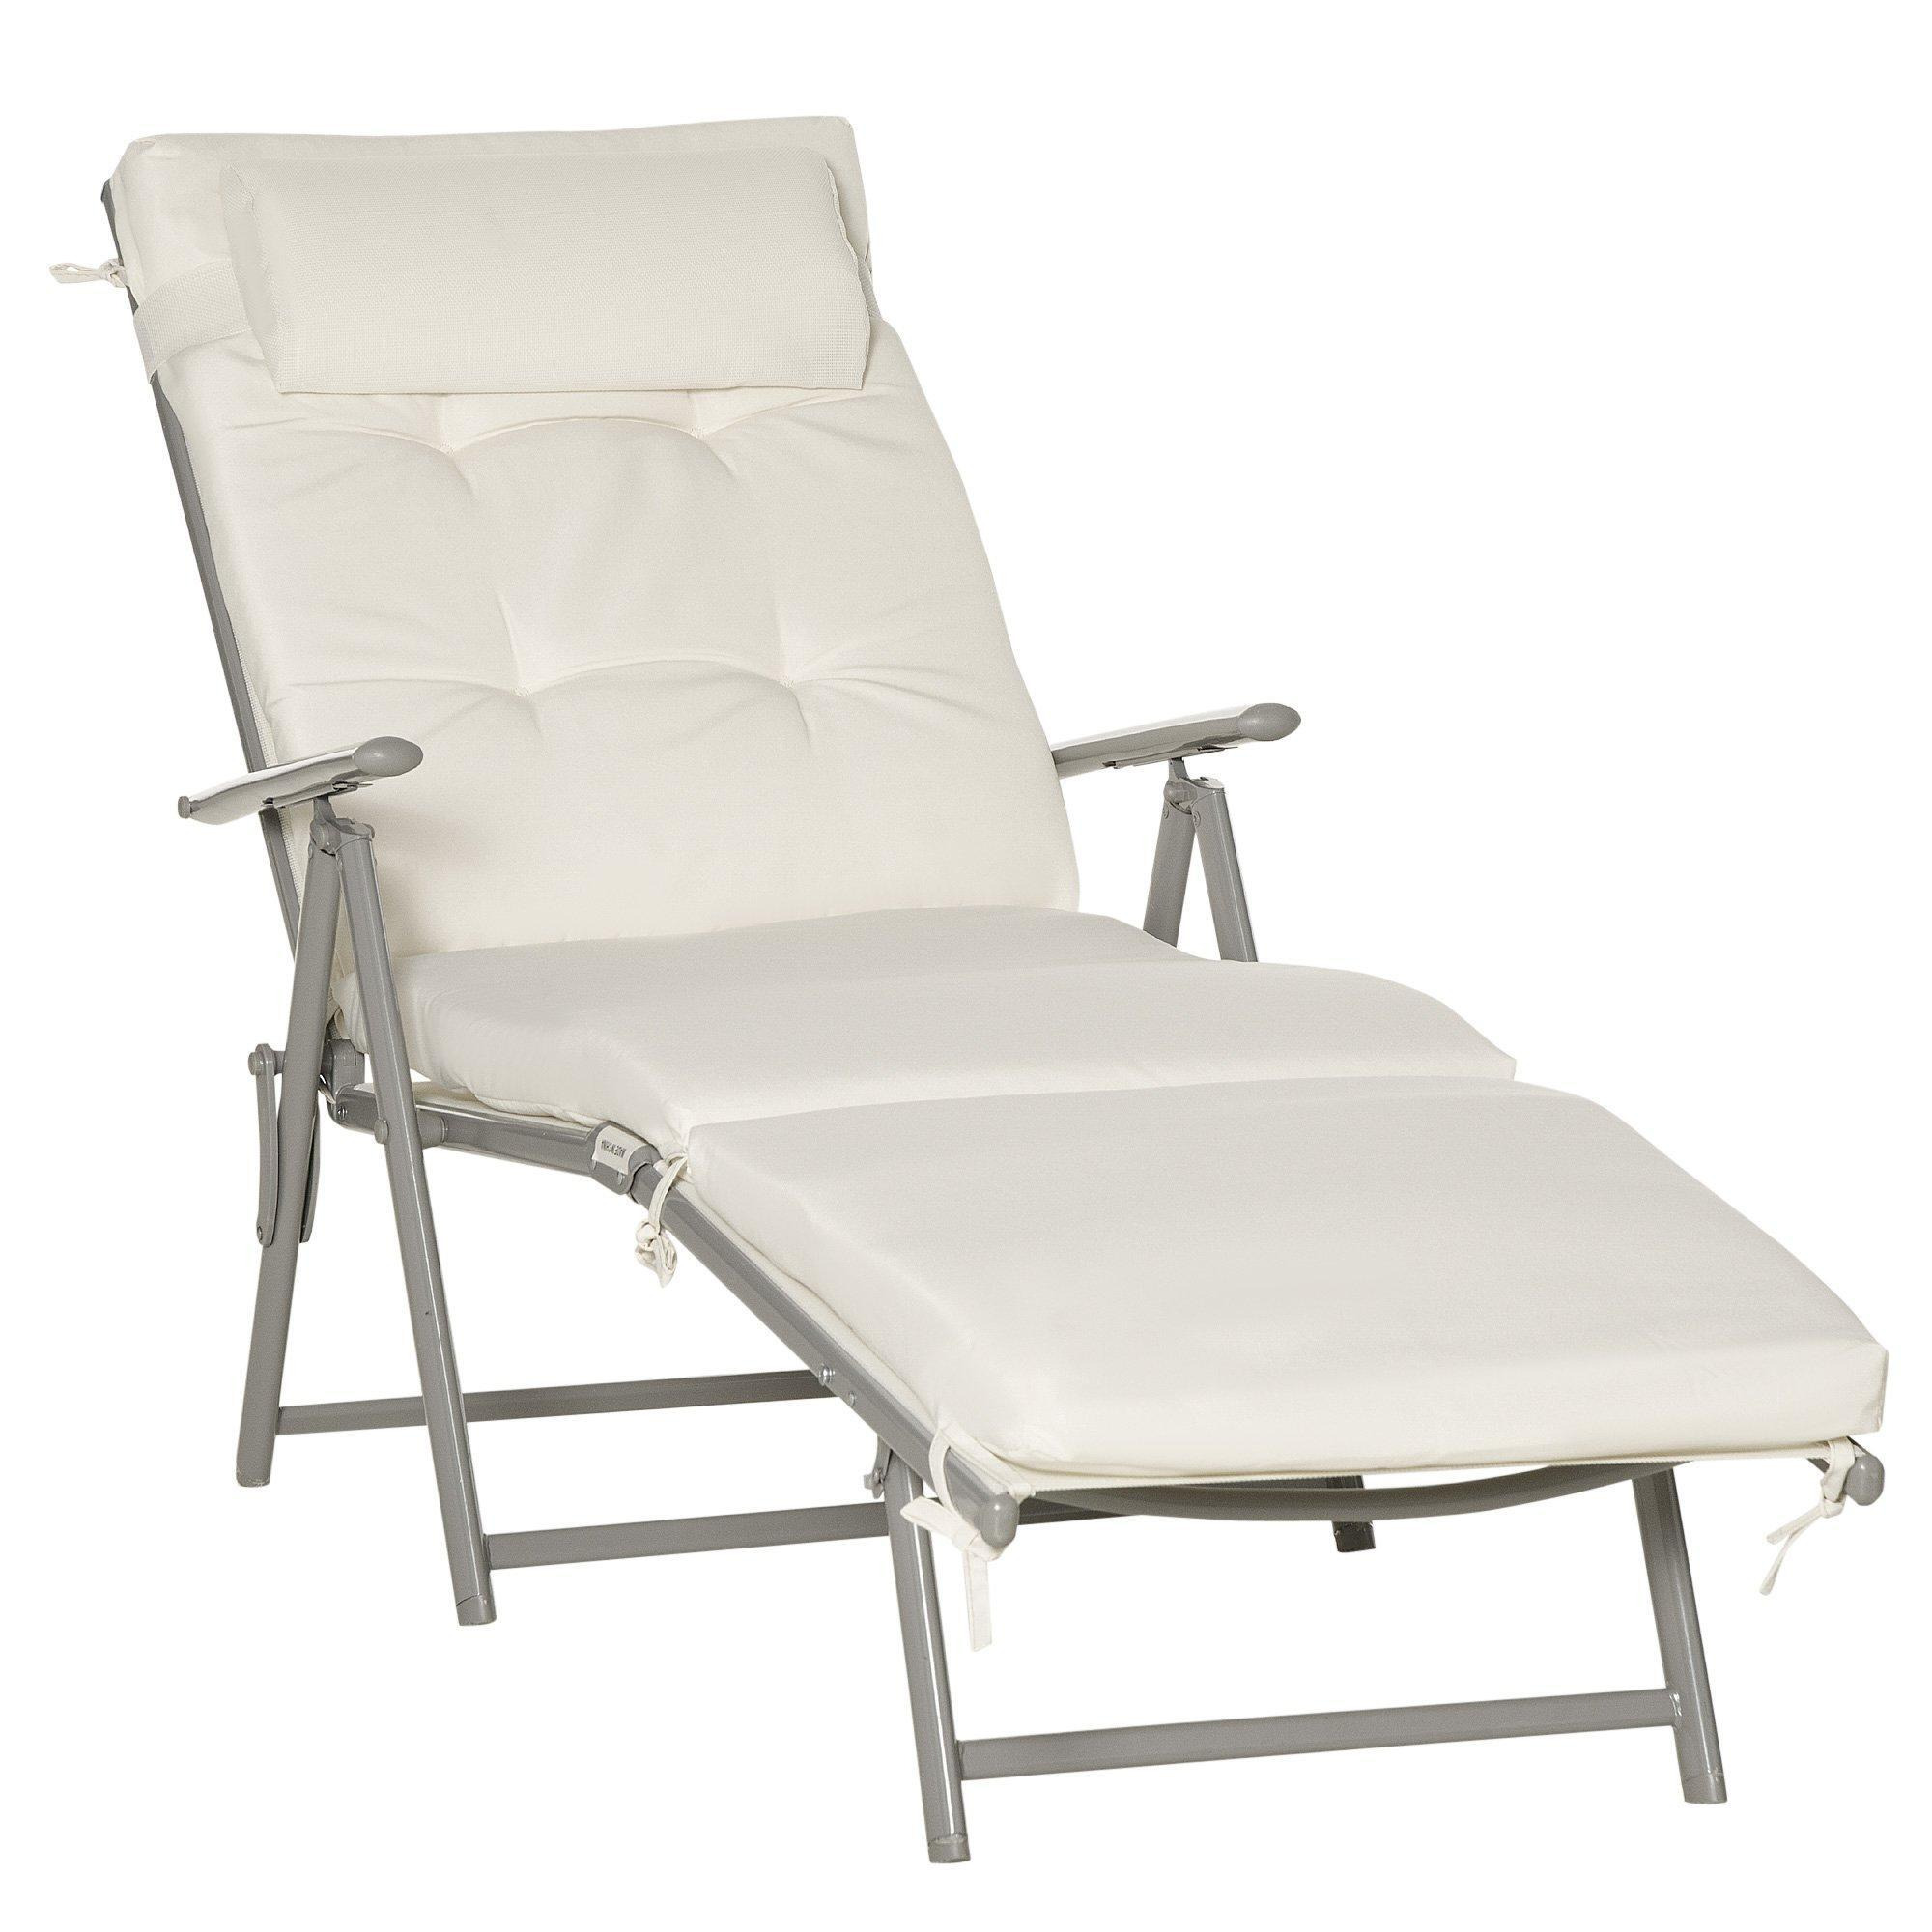 Sun Lounger Recliner Foldable Padded Seat Adjustable Texteline - image 1